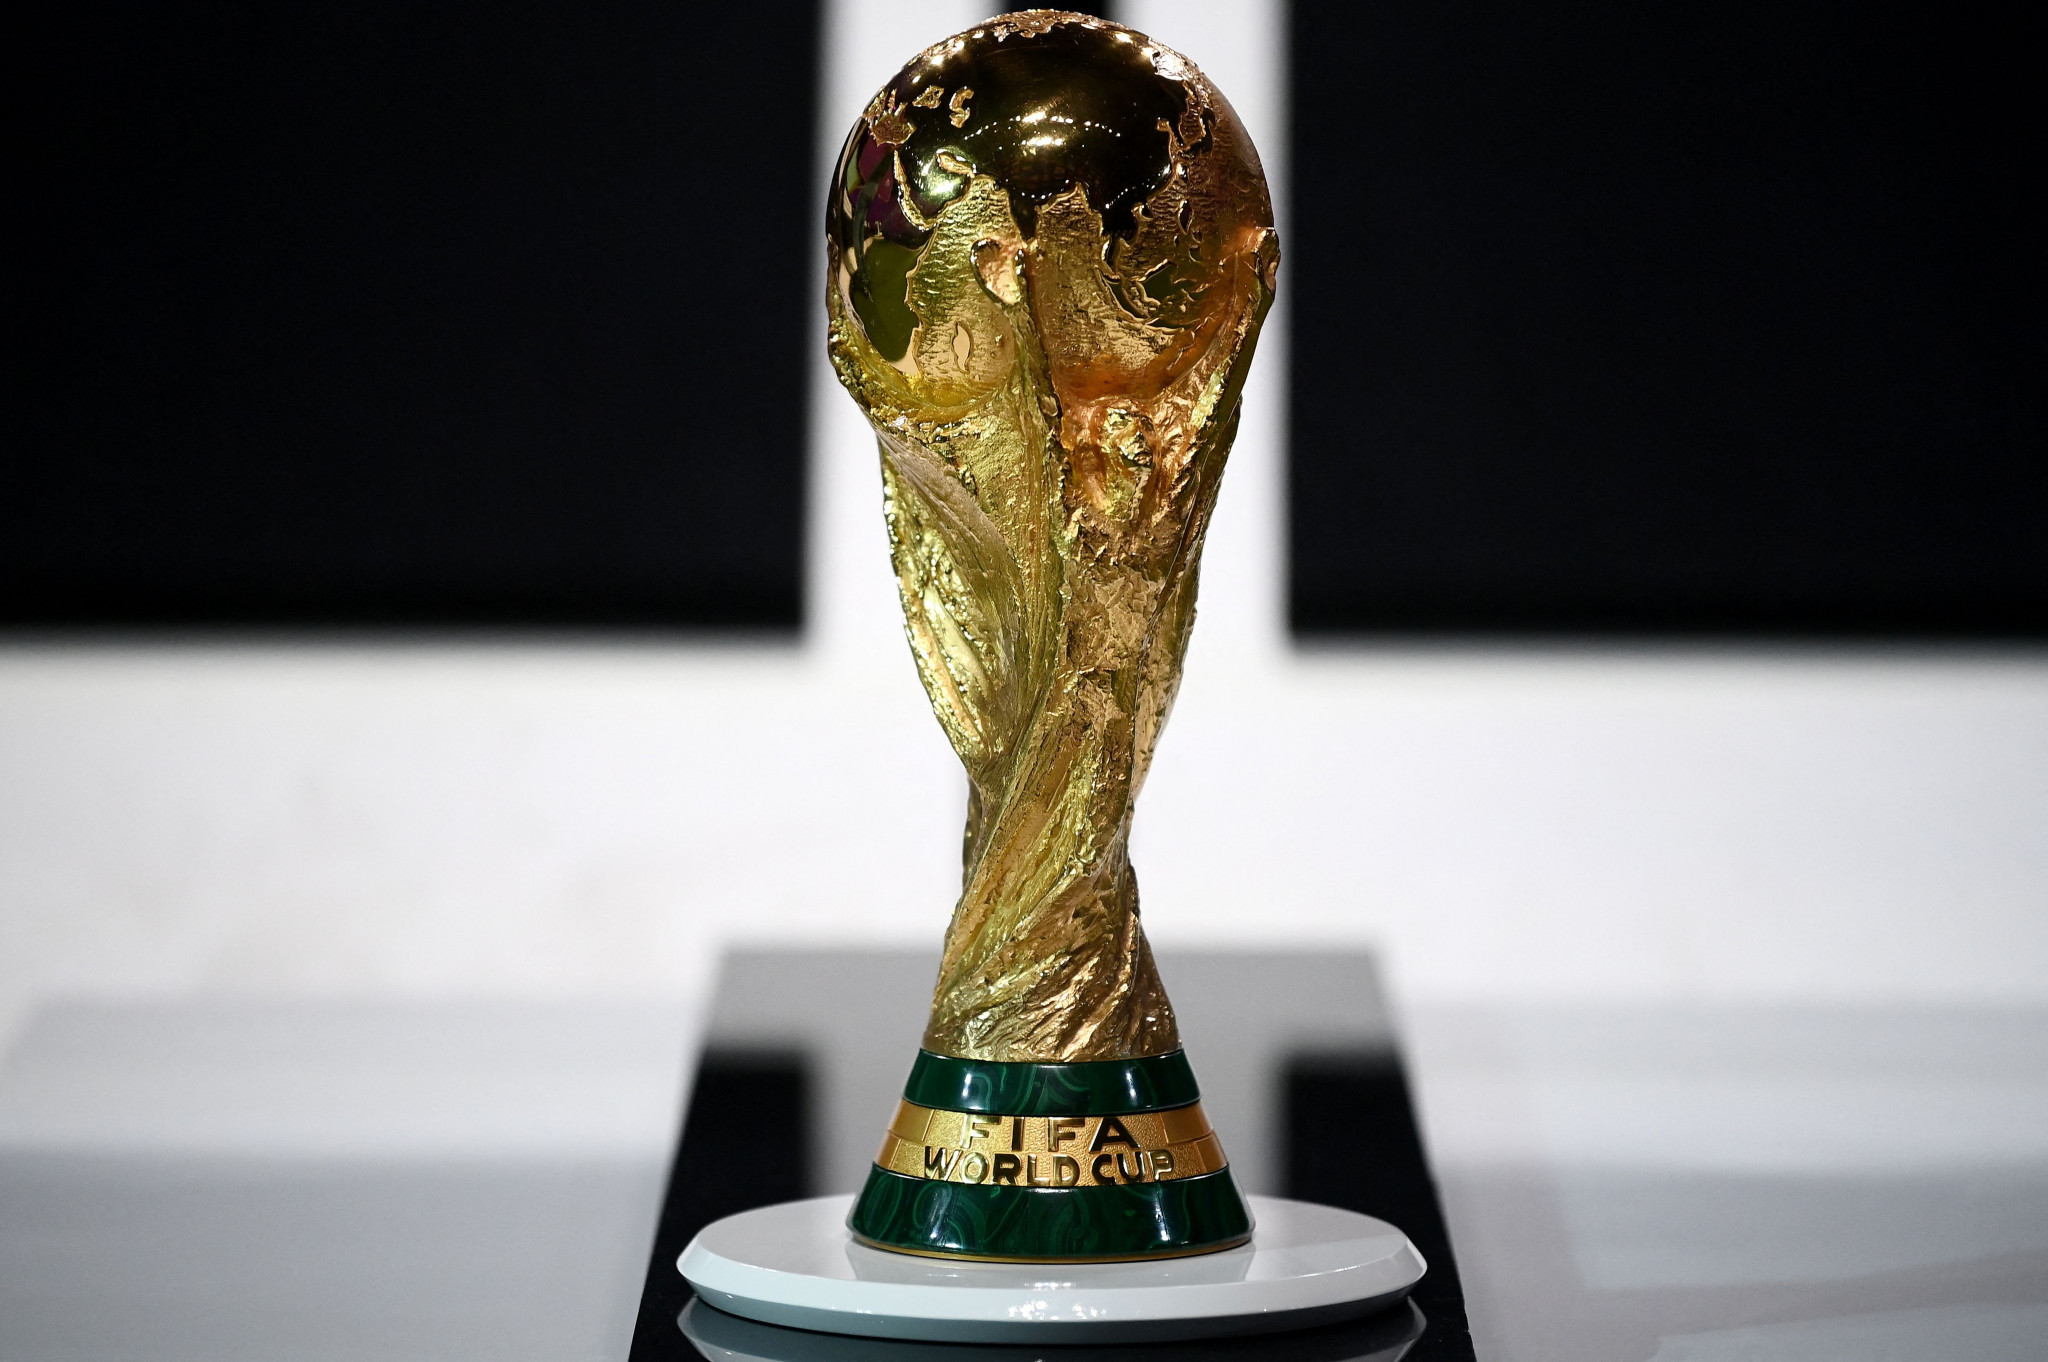 FIFA World Cup expected to start day earlier than planned as Qatar game moves forward